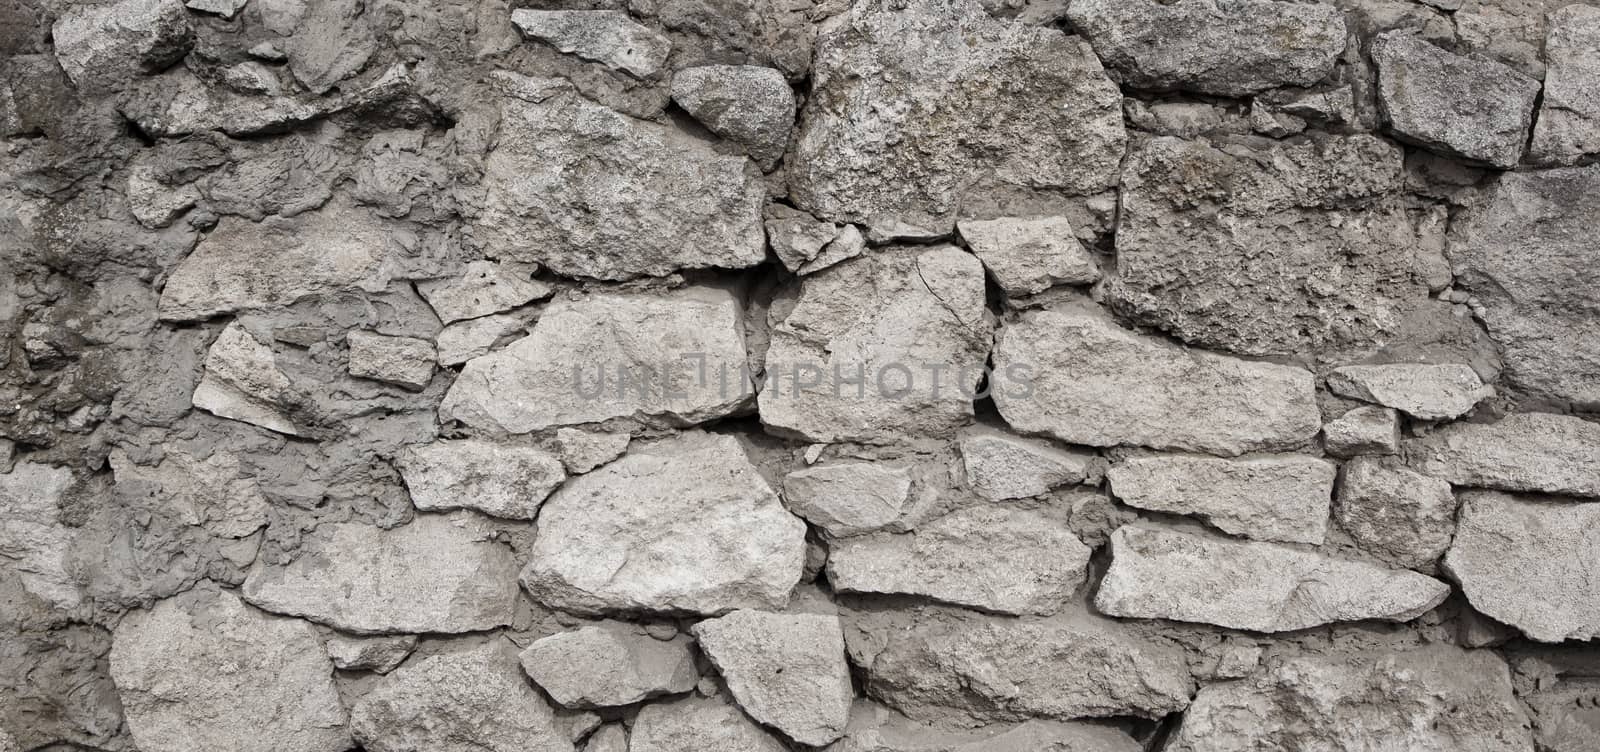 Old stone and wall close-up by SlayCer